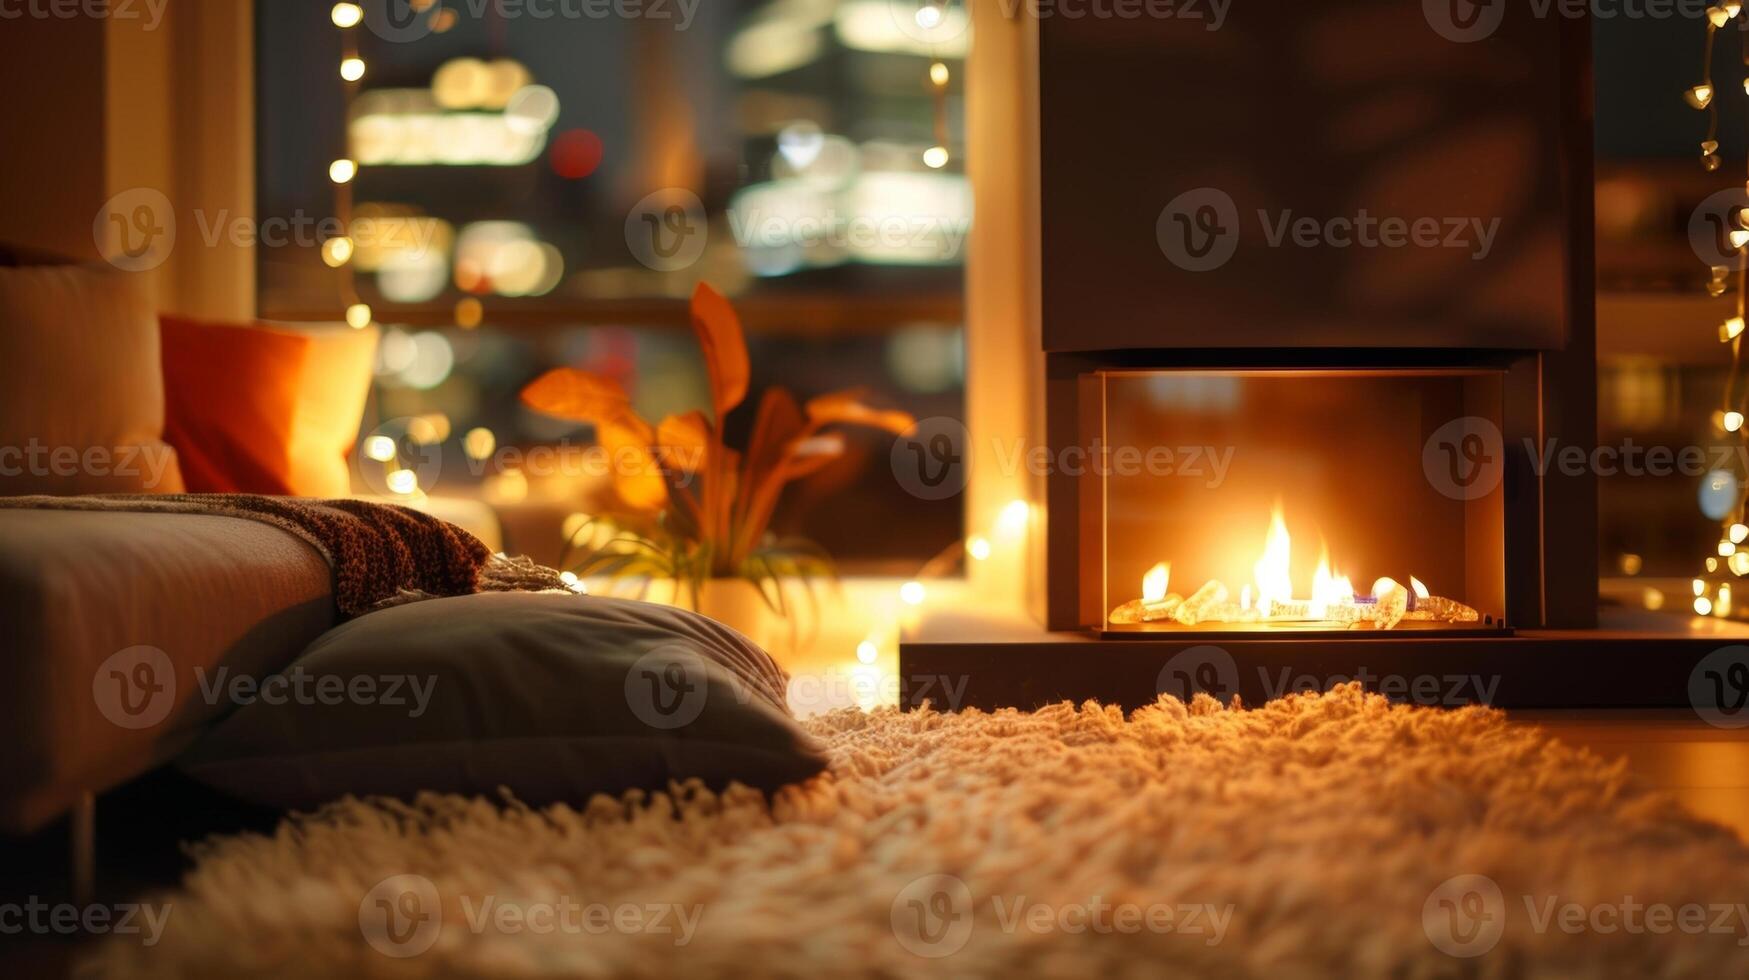 A cozy reading nook with a bioethanol fireplace at its center offering both warmth and style for hours of relaxation and escapism. 2d flat cartoon photo